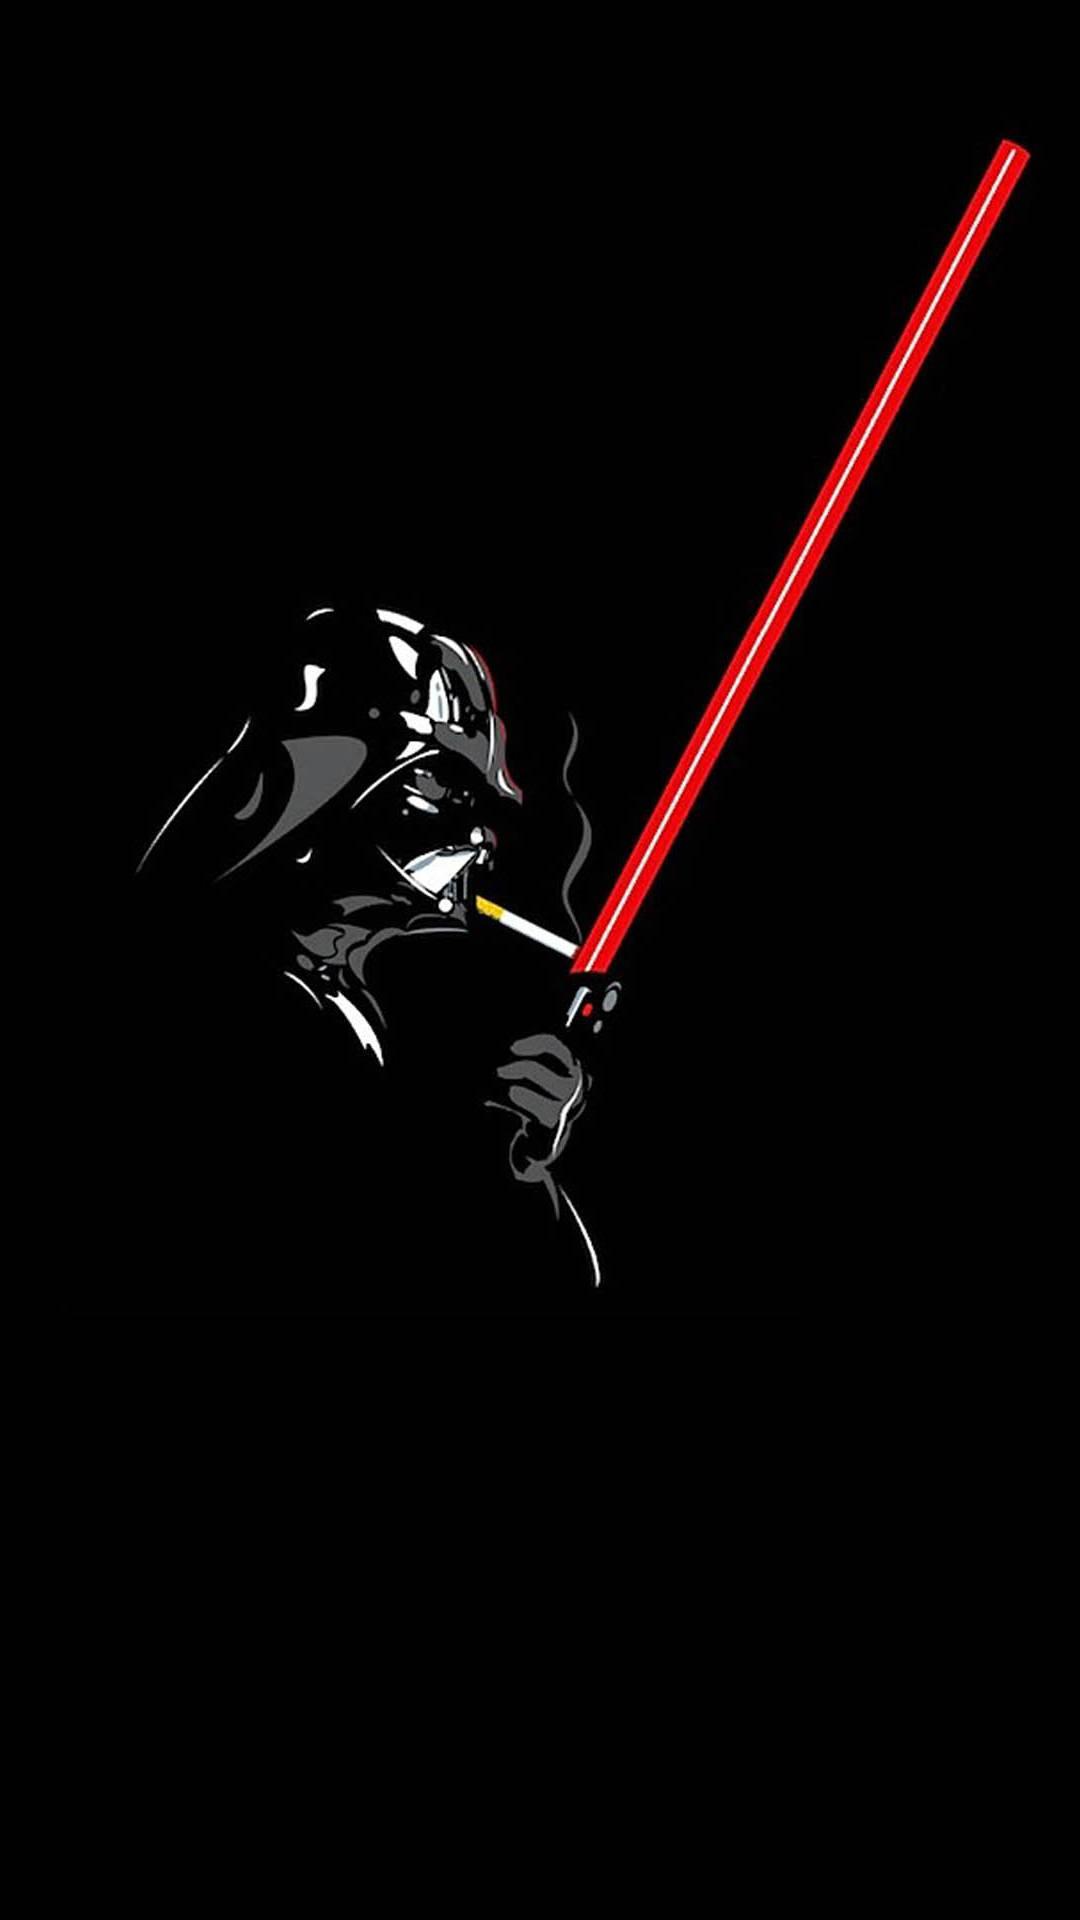 Stunning Star Wars iPhone 6s Wallpaper image For Free